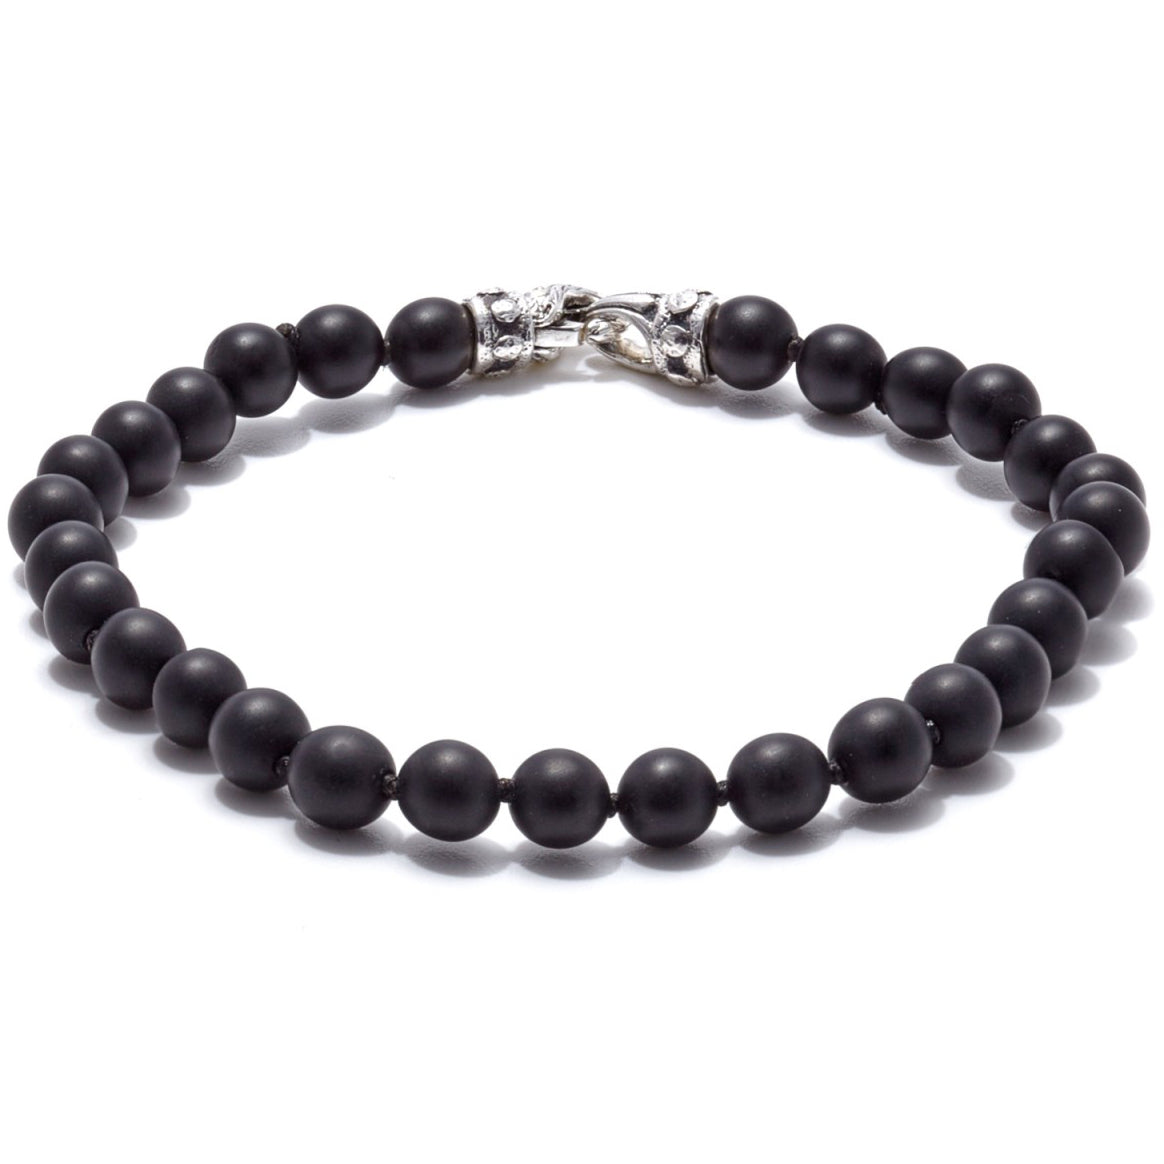 Scott Kay Matte Black Onyx Bracelet Men's Beads Collection with Sterling Silver Clasp, 6mm, 8.5 inches